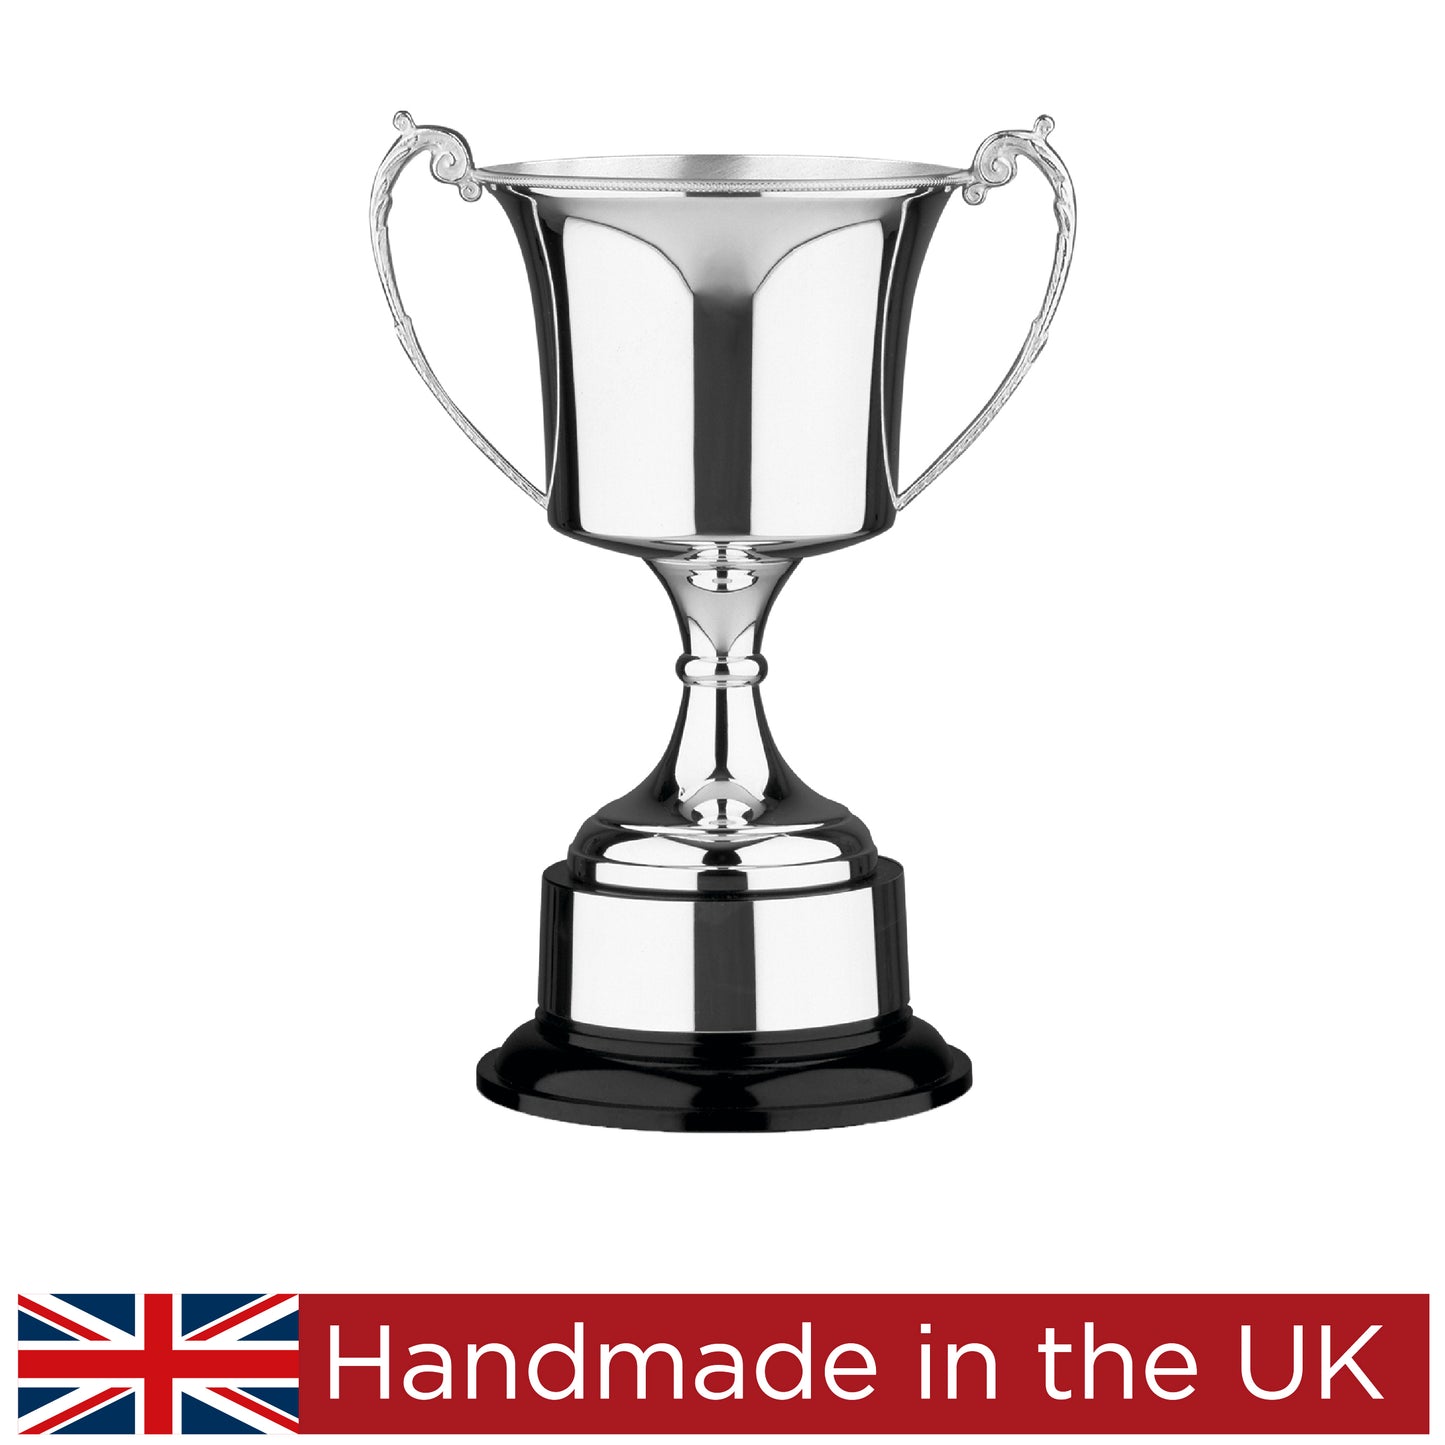 Prestigious Cup - Studio Handmade Cup Series - Available in 4 Sizes